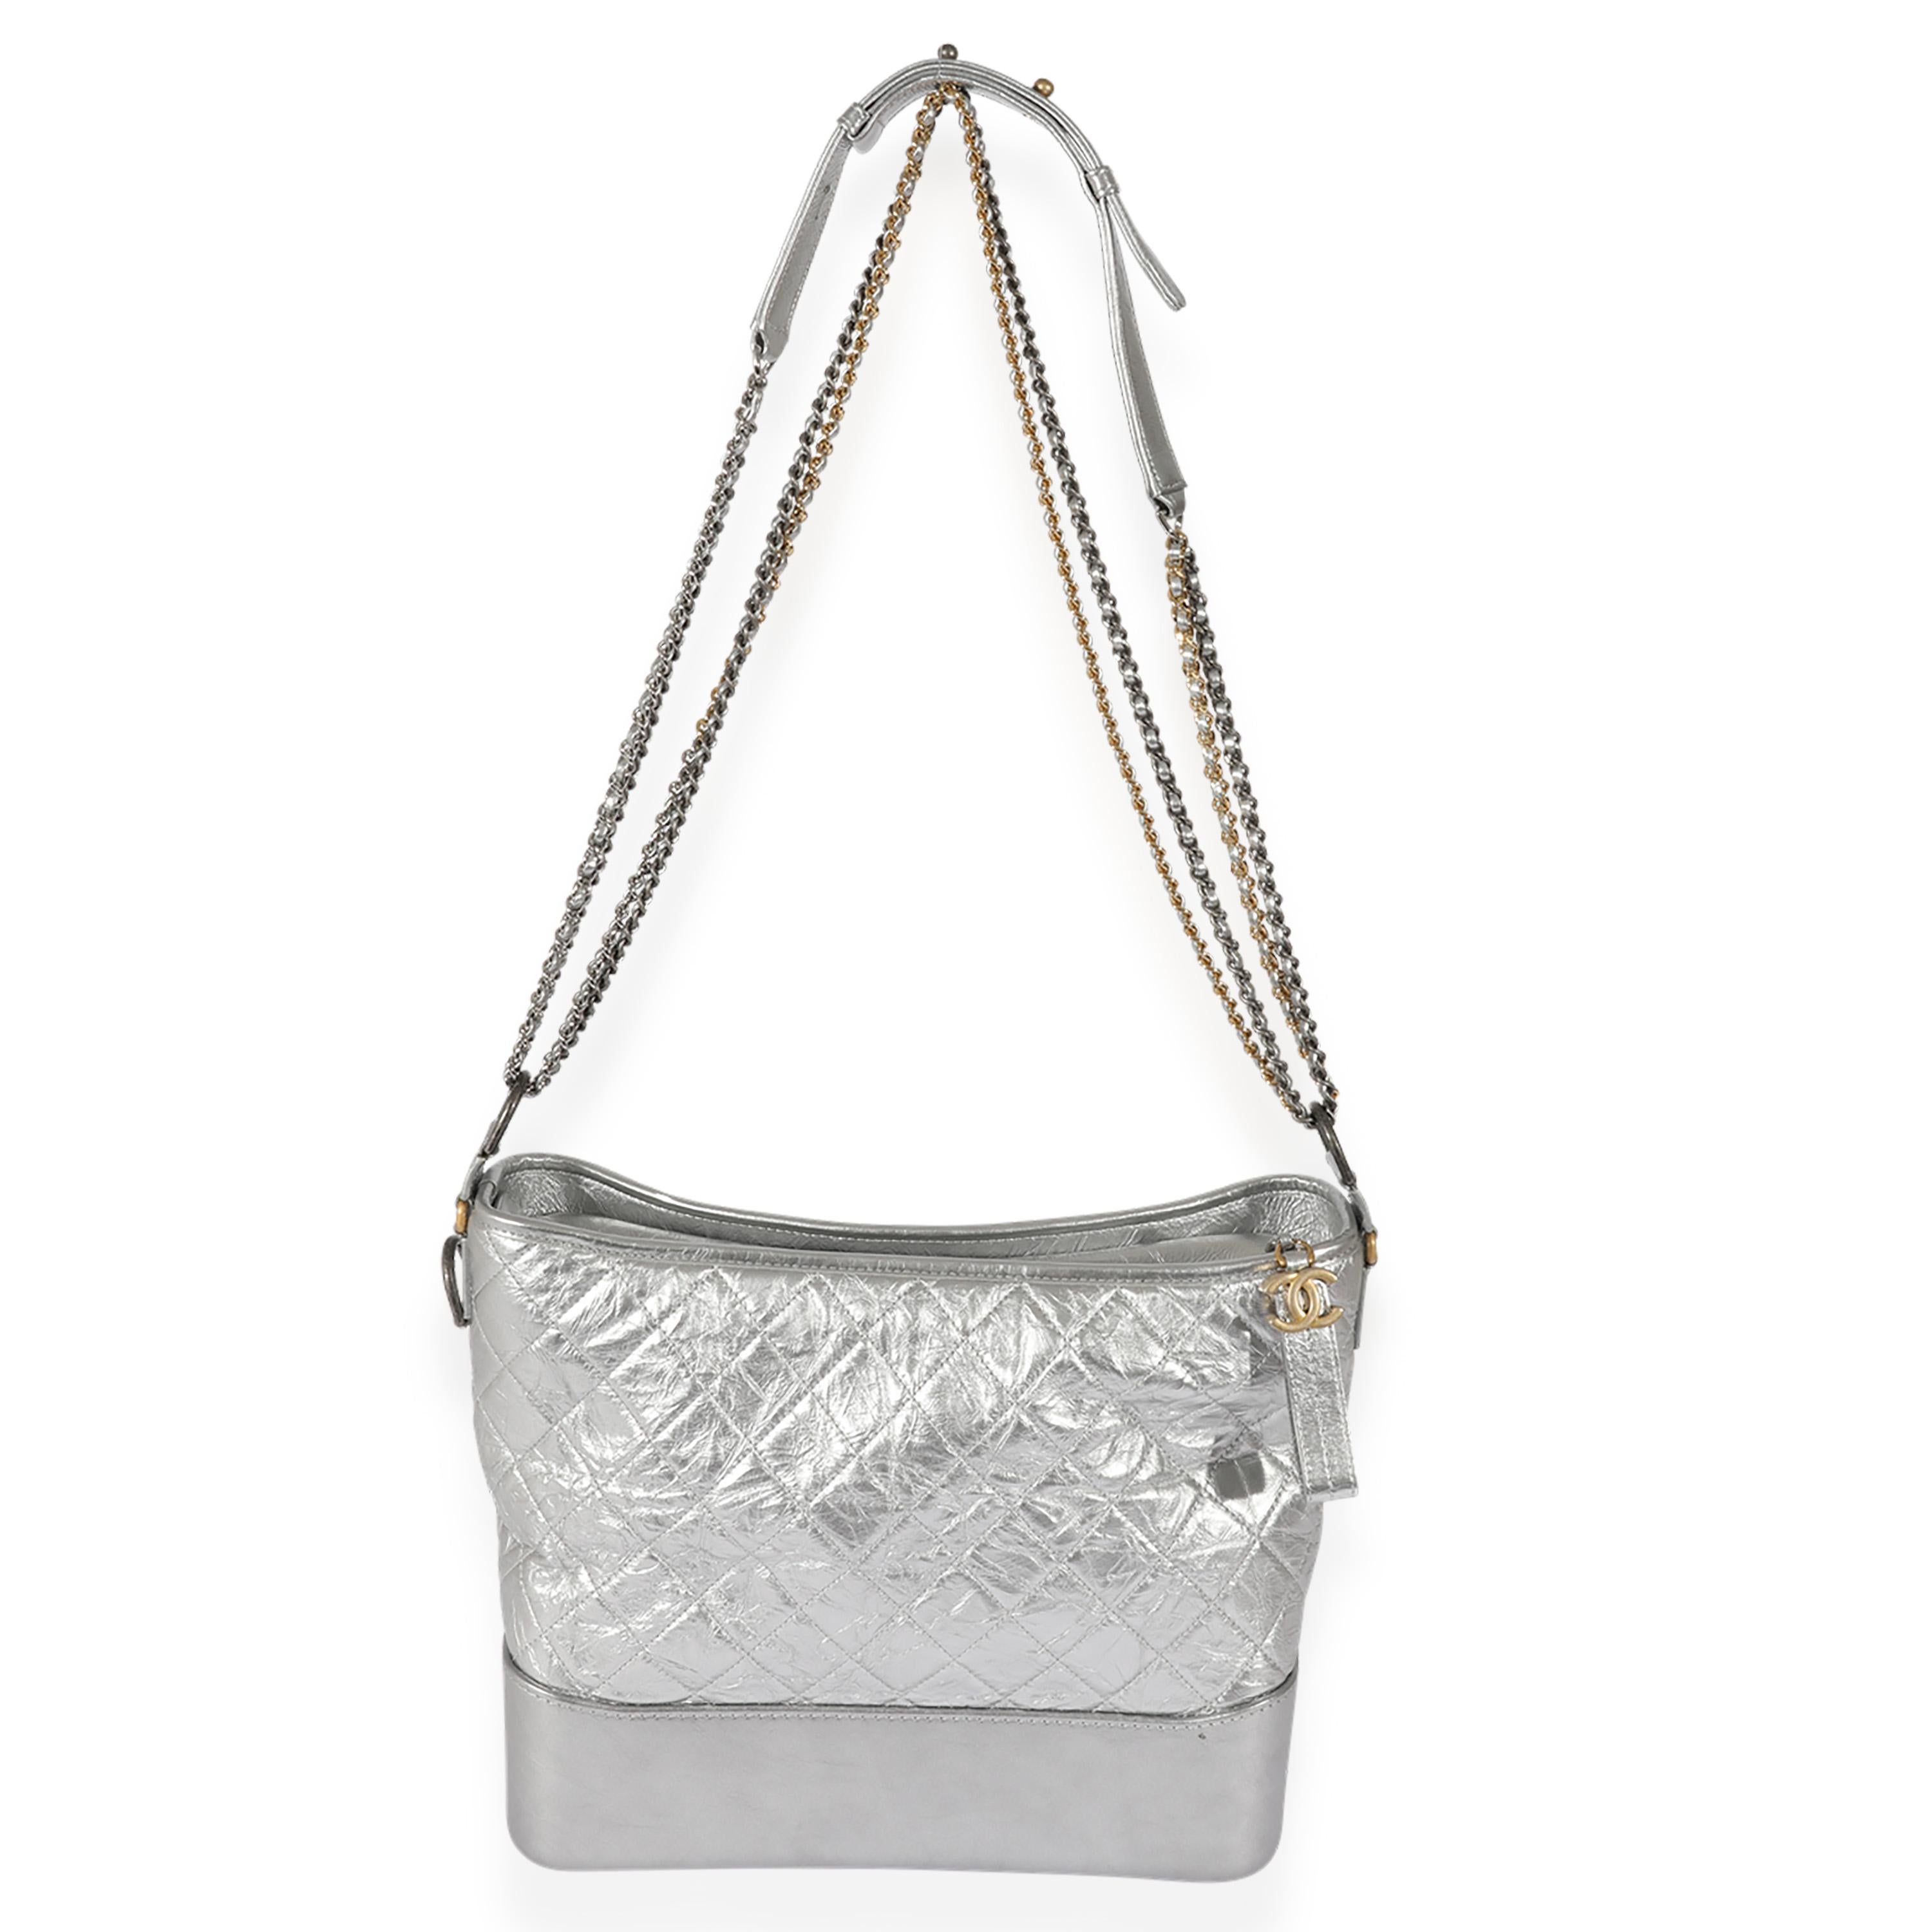 Listing Title: Chanel Silver Quilted Aged Calfskin Large Gabrielle Hobo
SKU: 126527
Condition: Pre-owned 
Handbag Condition: Very Good
Condition Comments: Very Good Condition. Scuffing at exterior and marks throughout. Light scratching at